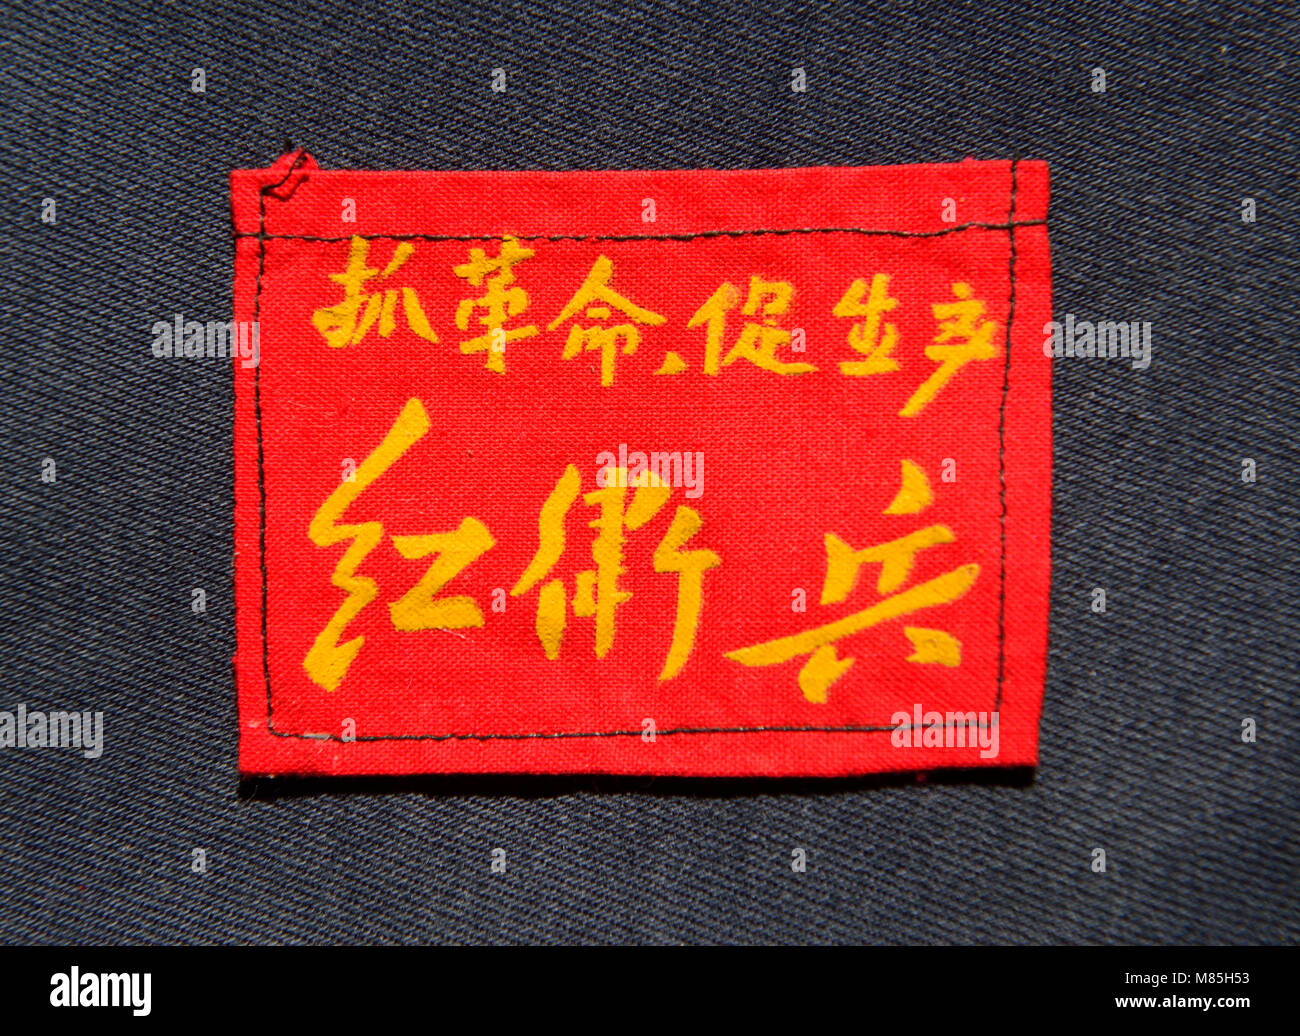 1966-1976 Cultural Revolution 'Red Guard' armband. Stock Photo